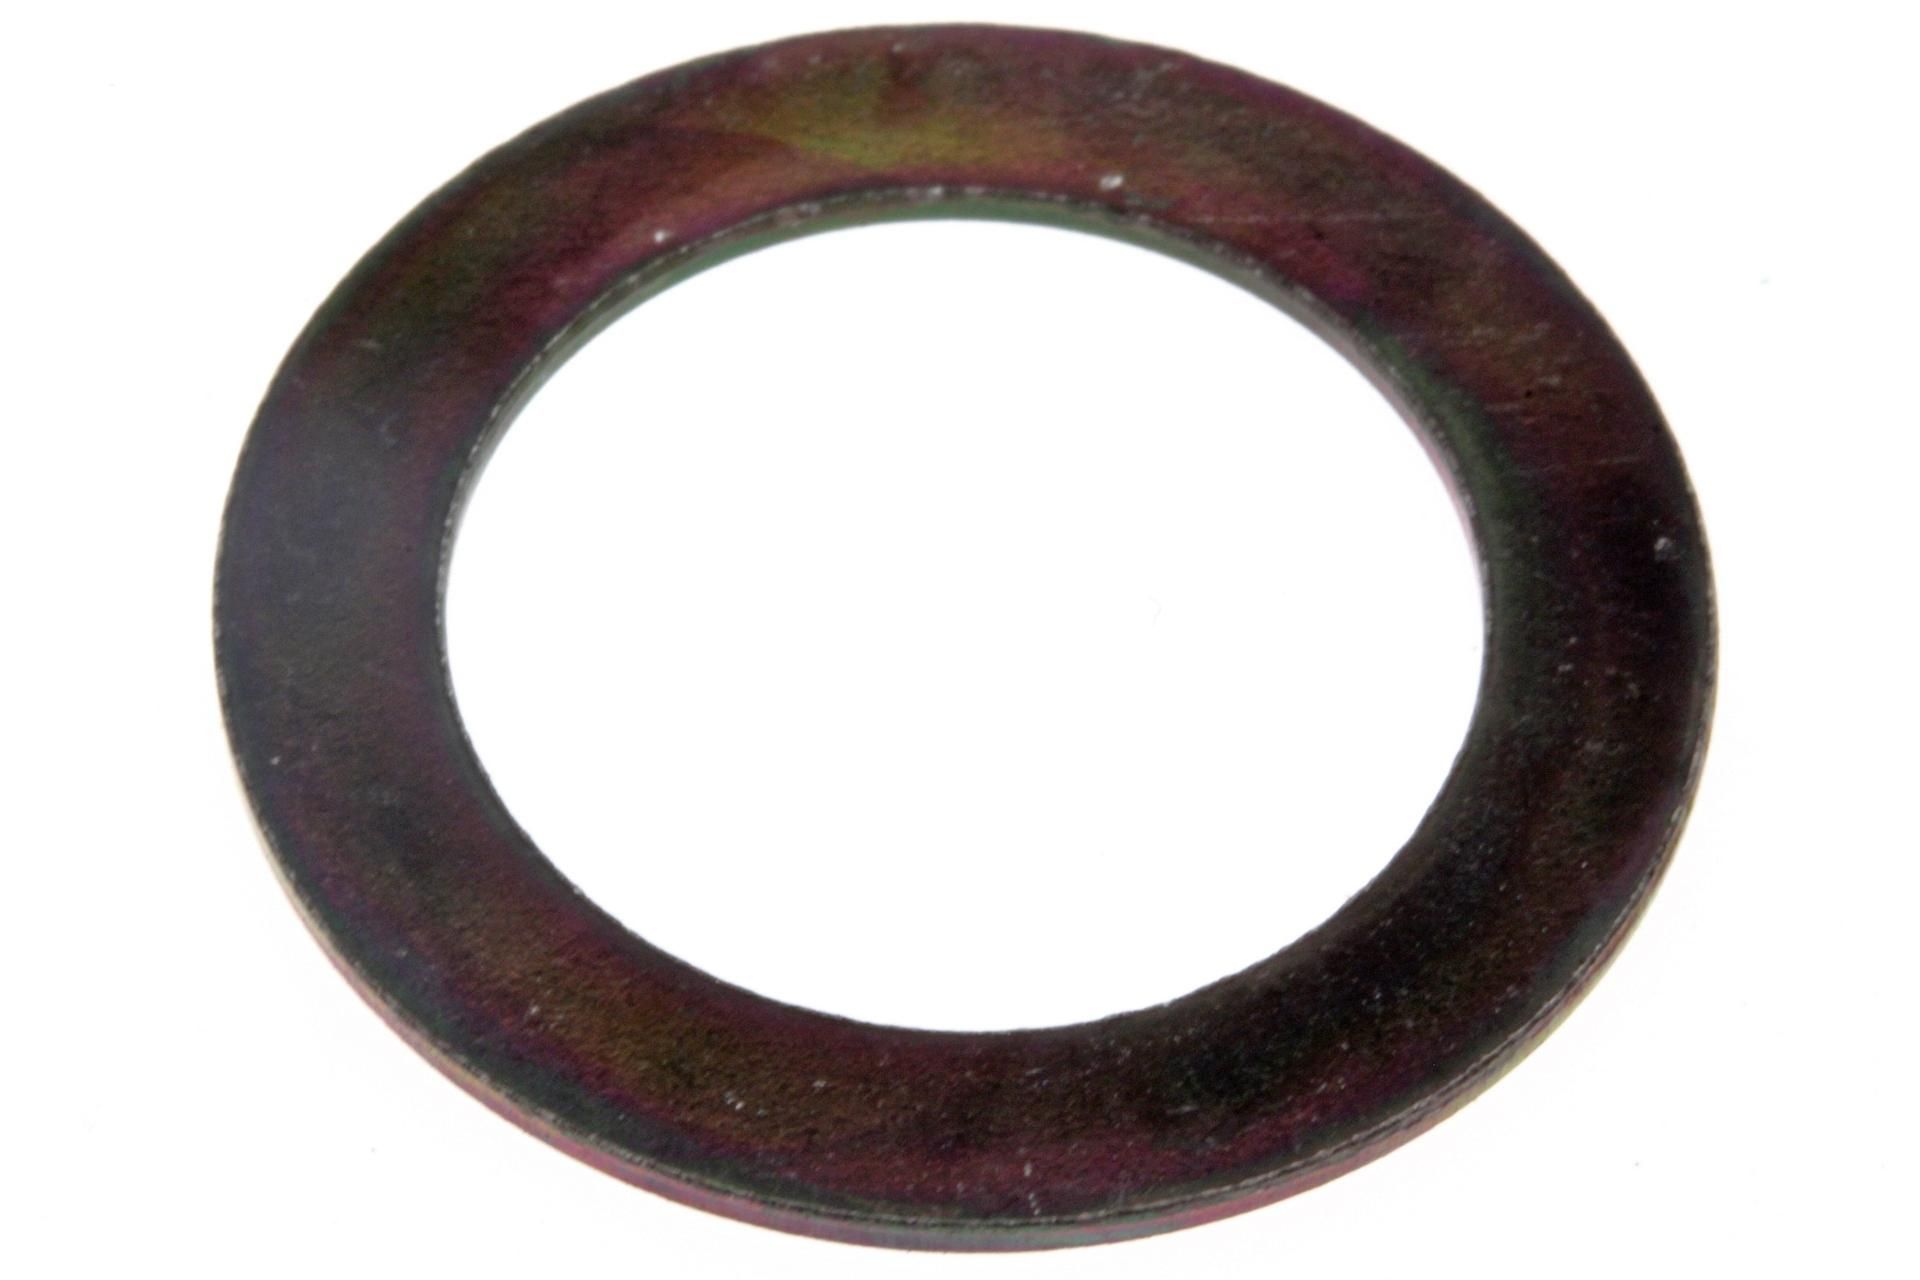 168-21758-00-00 Superseded by 90201-18262-00 - WASHER,PLATE